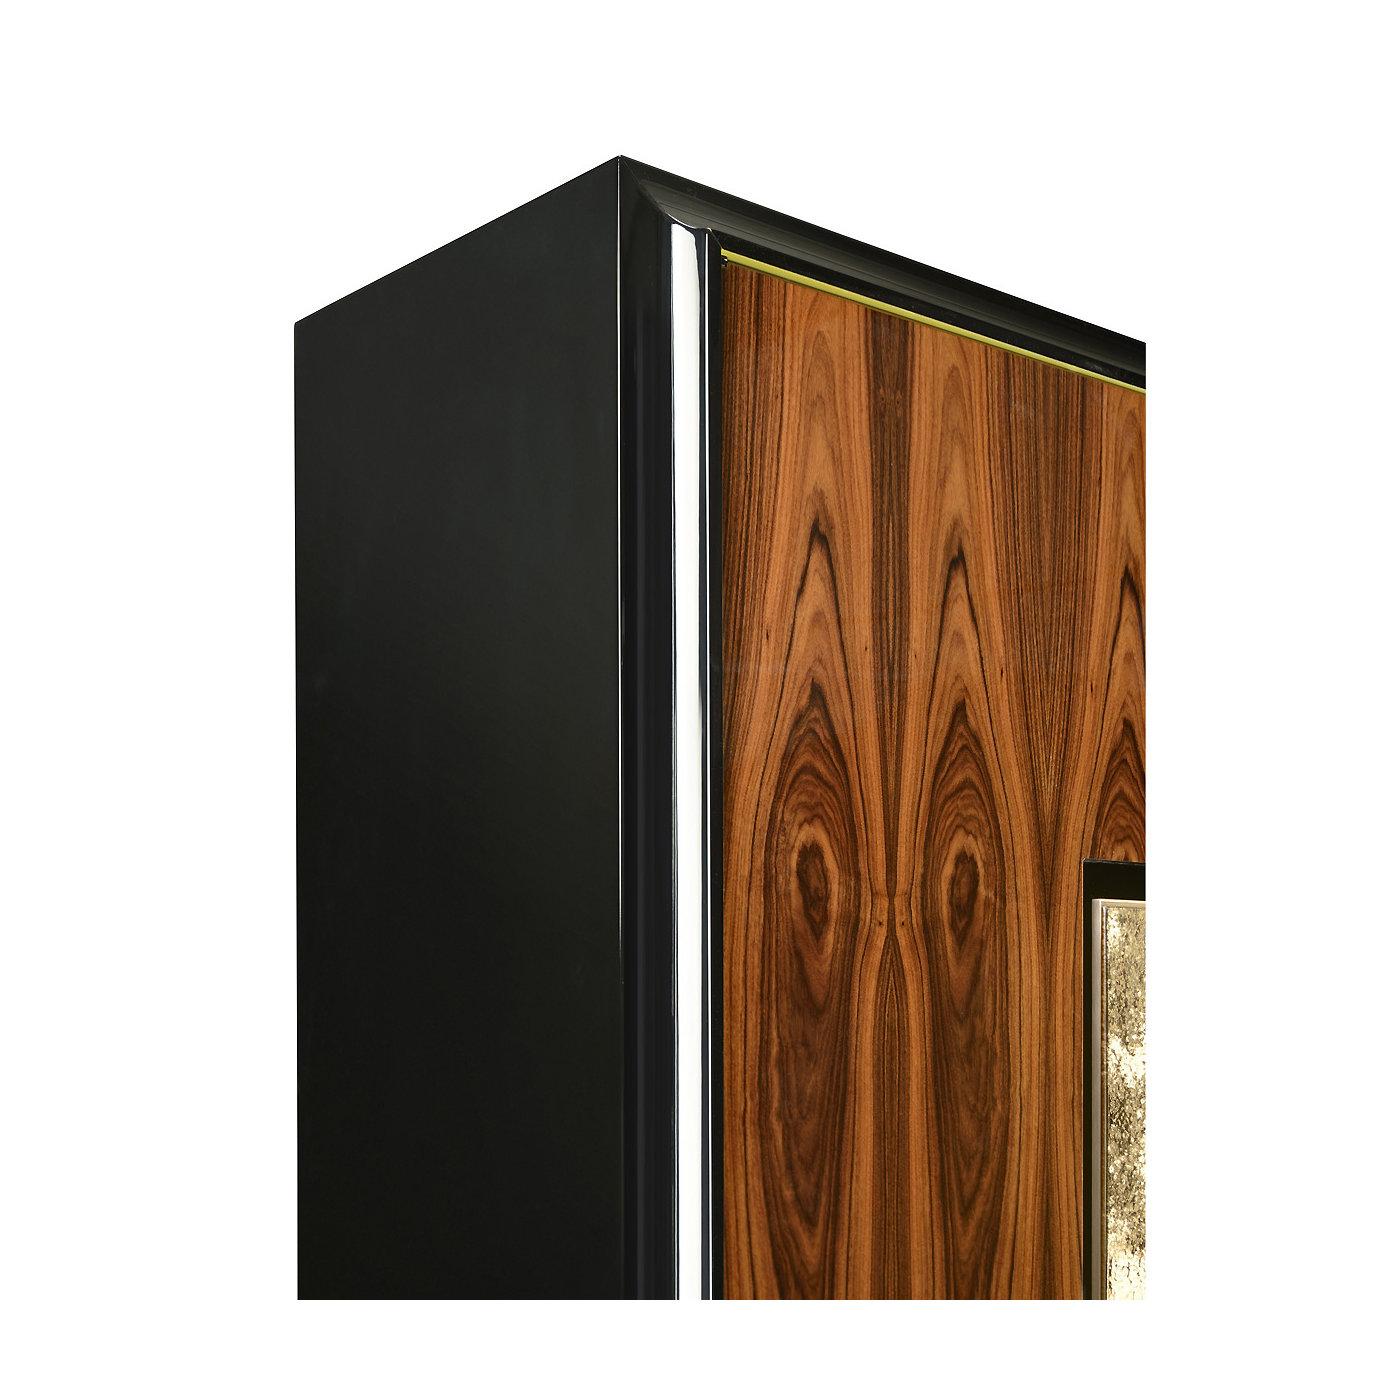 This magnificent cabinet will be an eye-catching addition to any decor, providing a precious storage space and stunning decoration in a living room, entrance, or study. The square silhouette features two doors with a striking veneer showing the